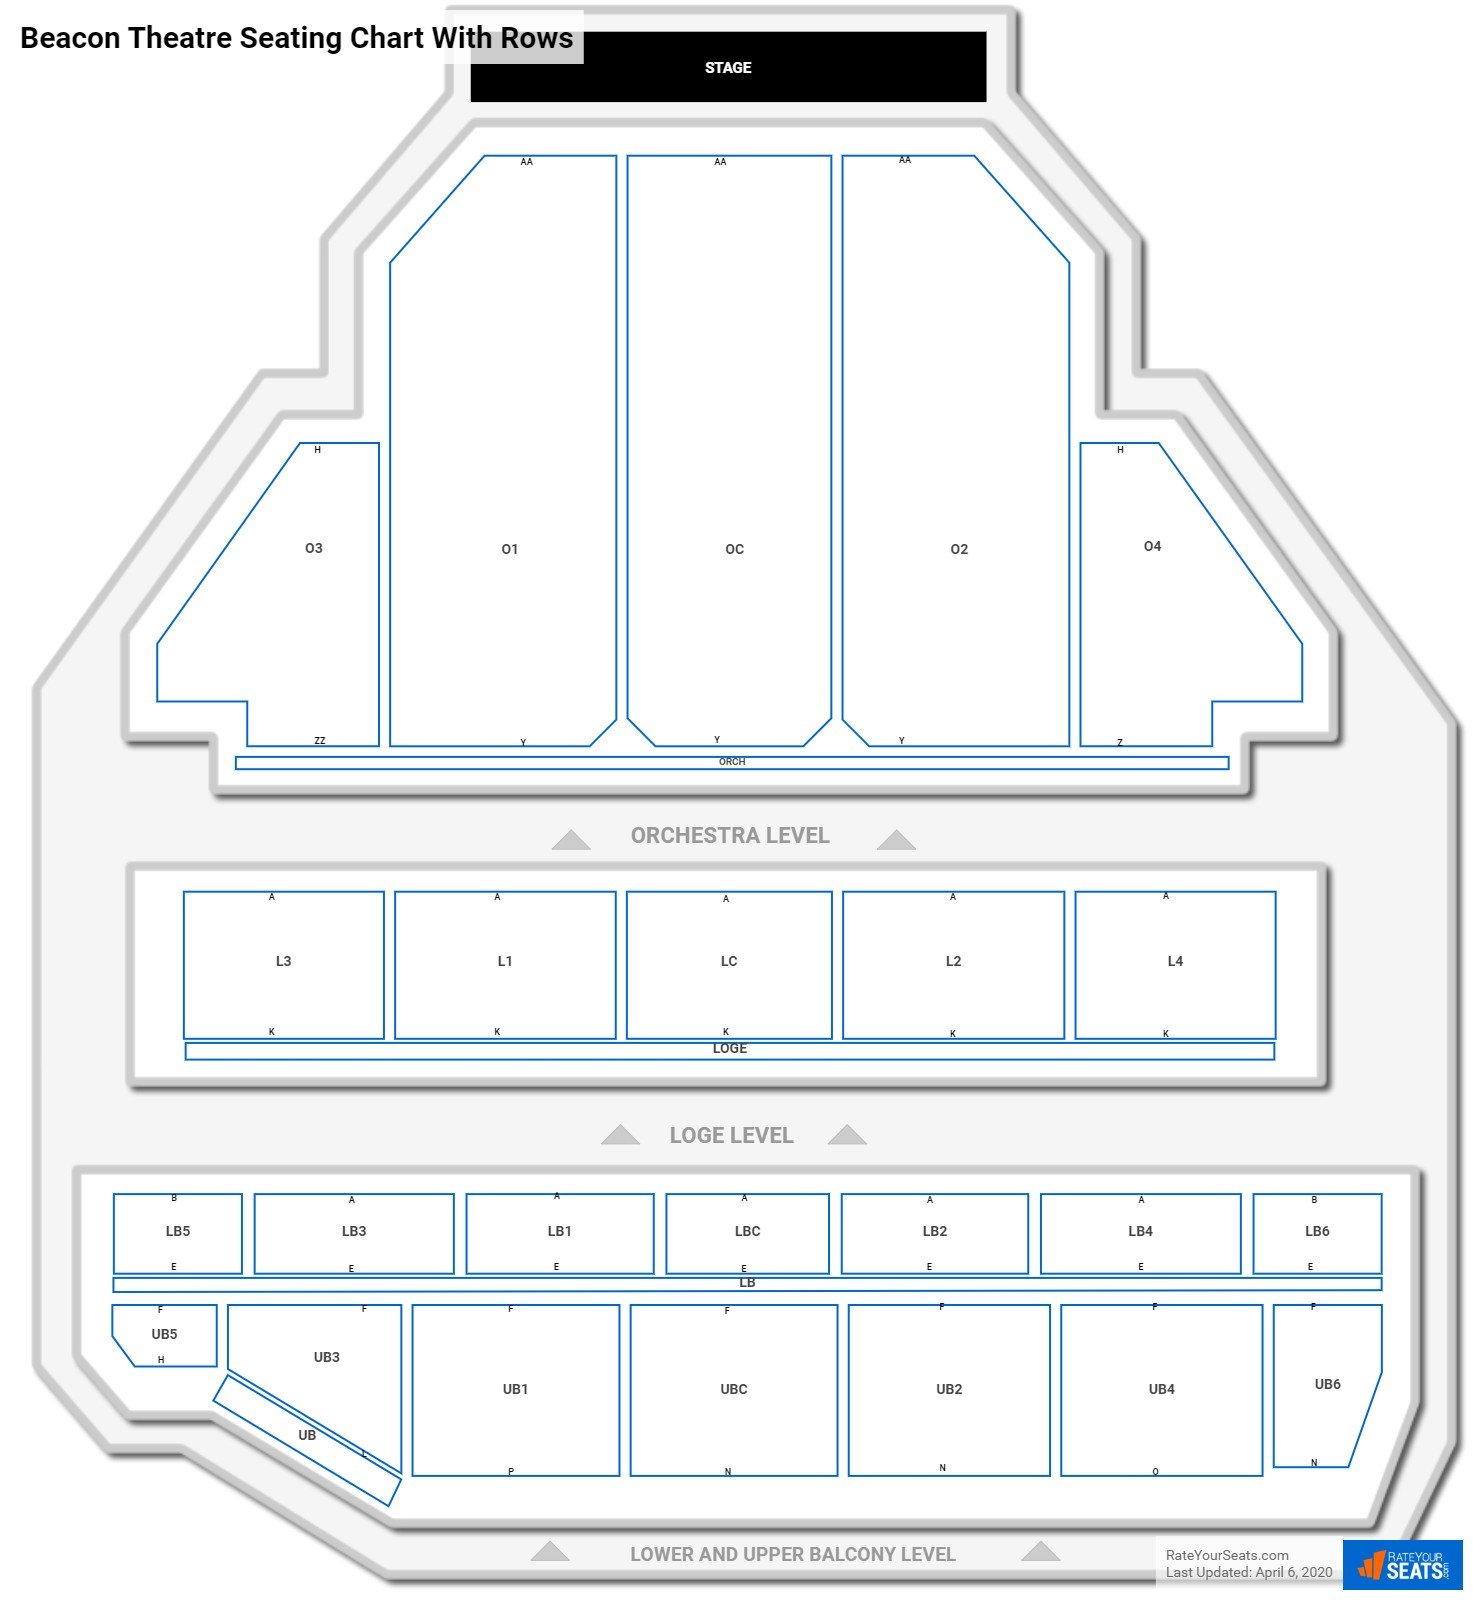 Beacon Theatre seating chart with row numbers